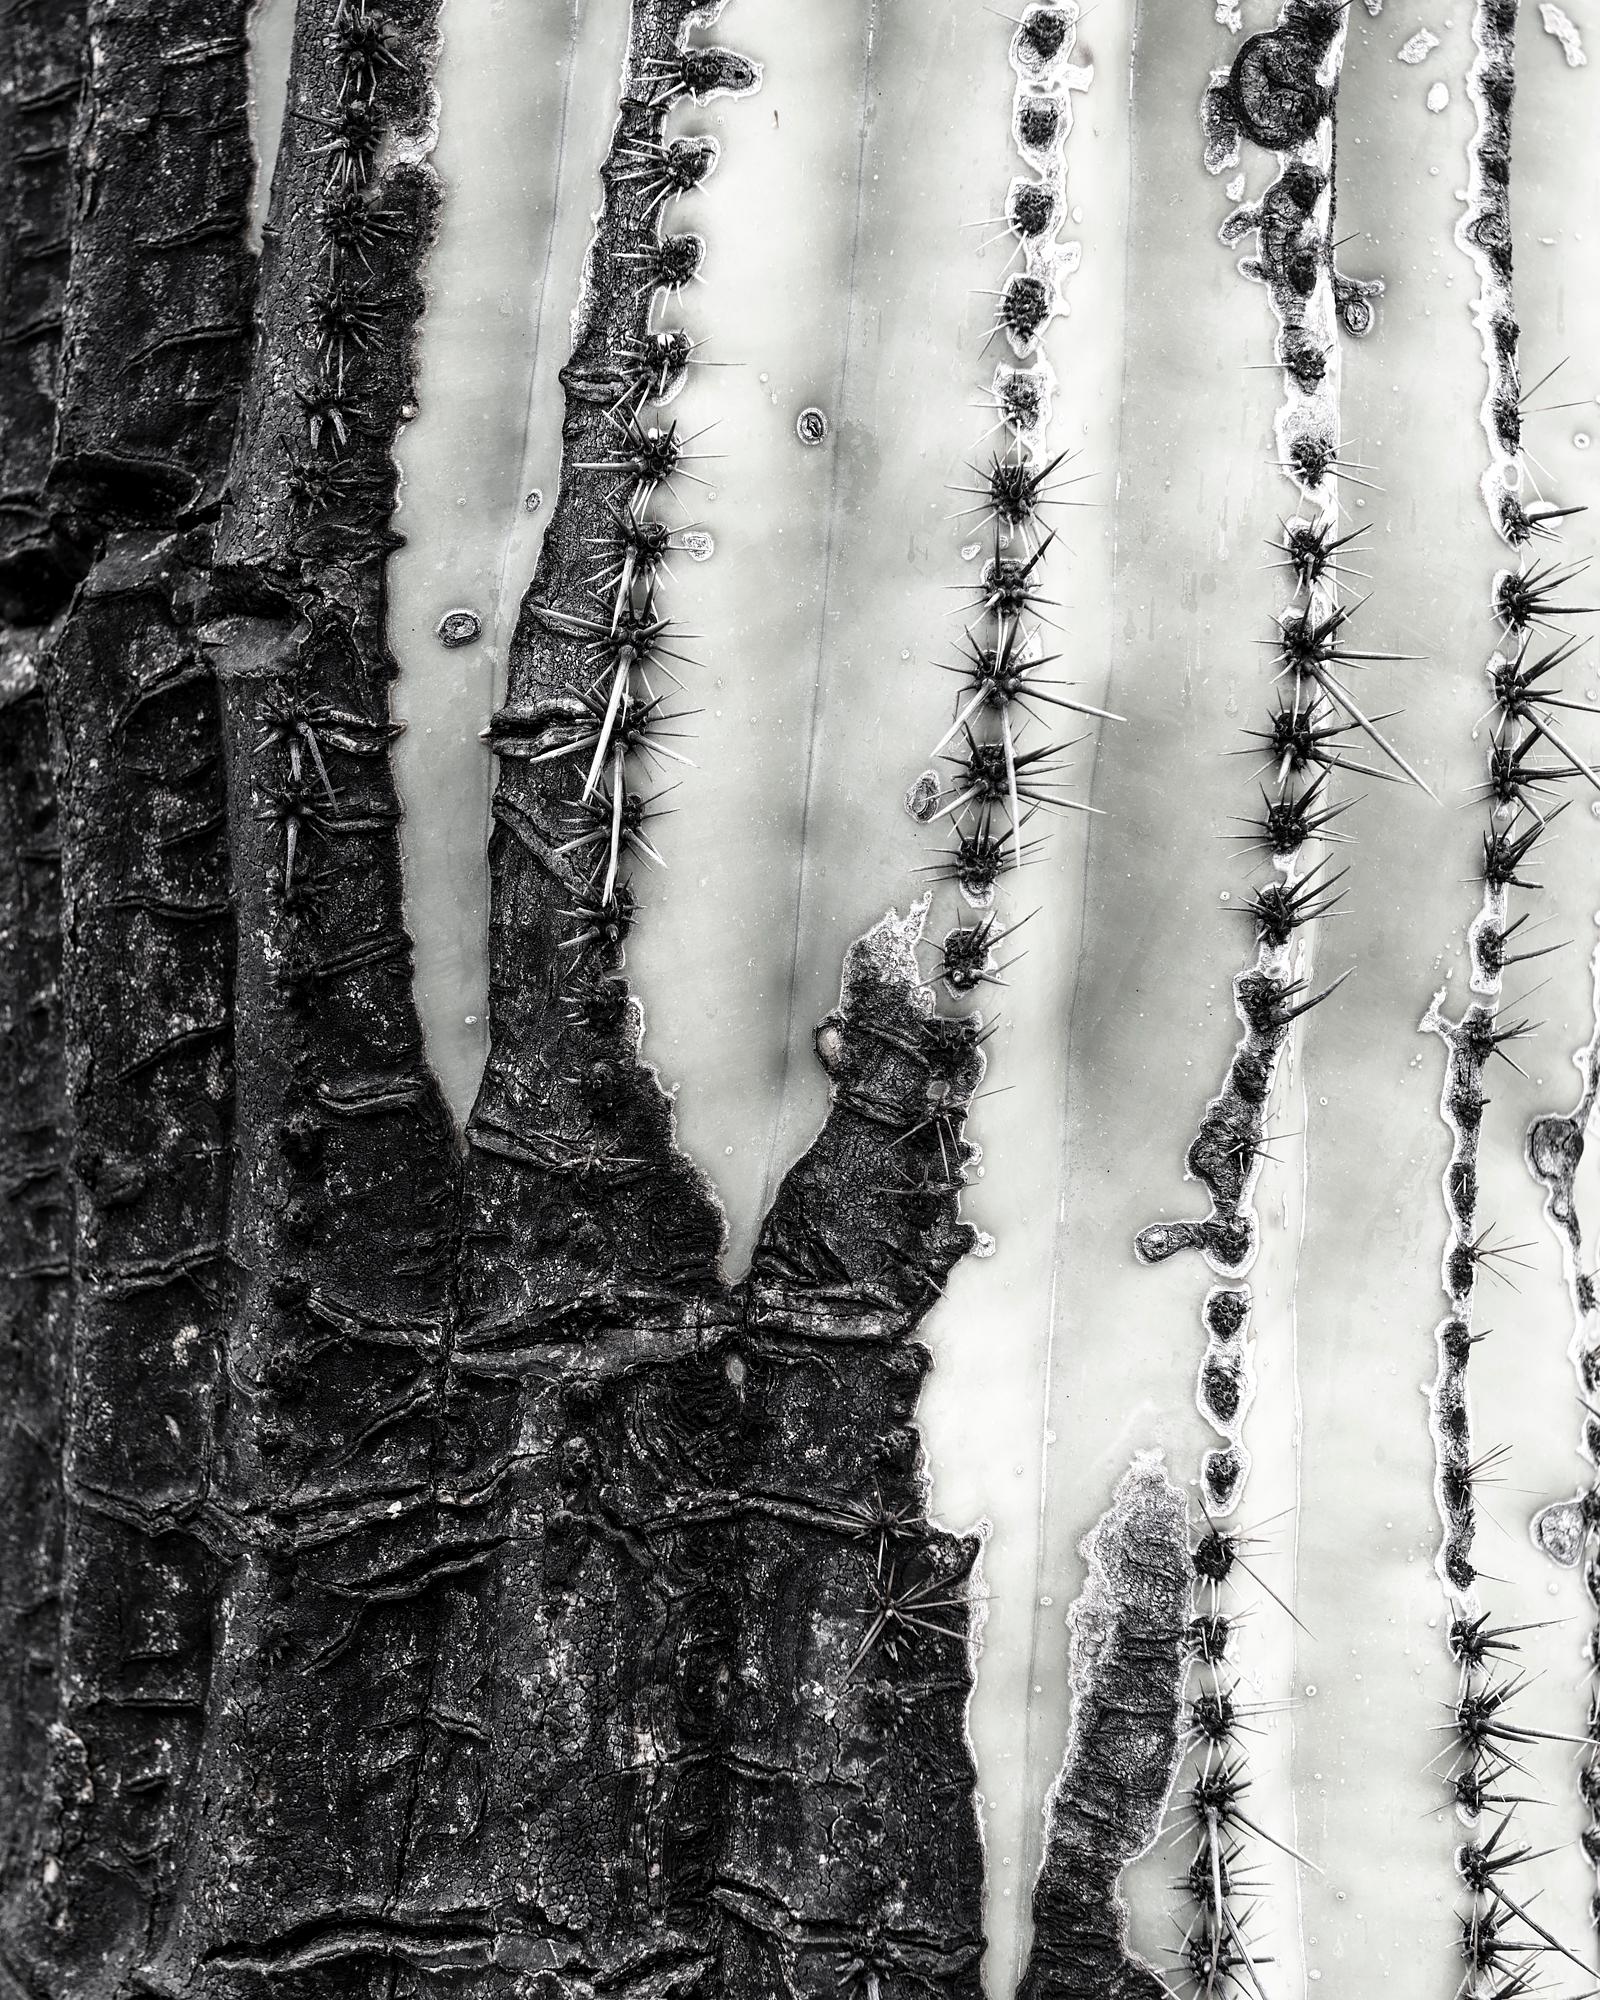 Limited Edition Prints from Desert Bellows, A Saguaro Series by Andrew Johnson 2